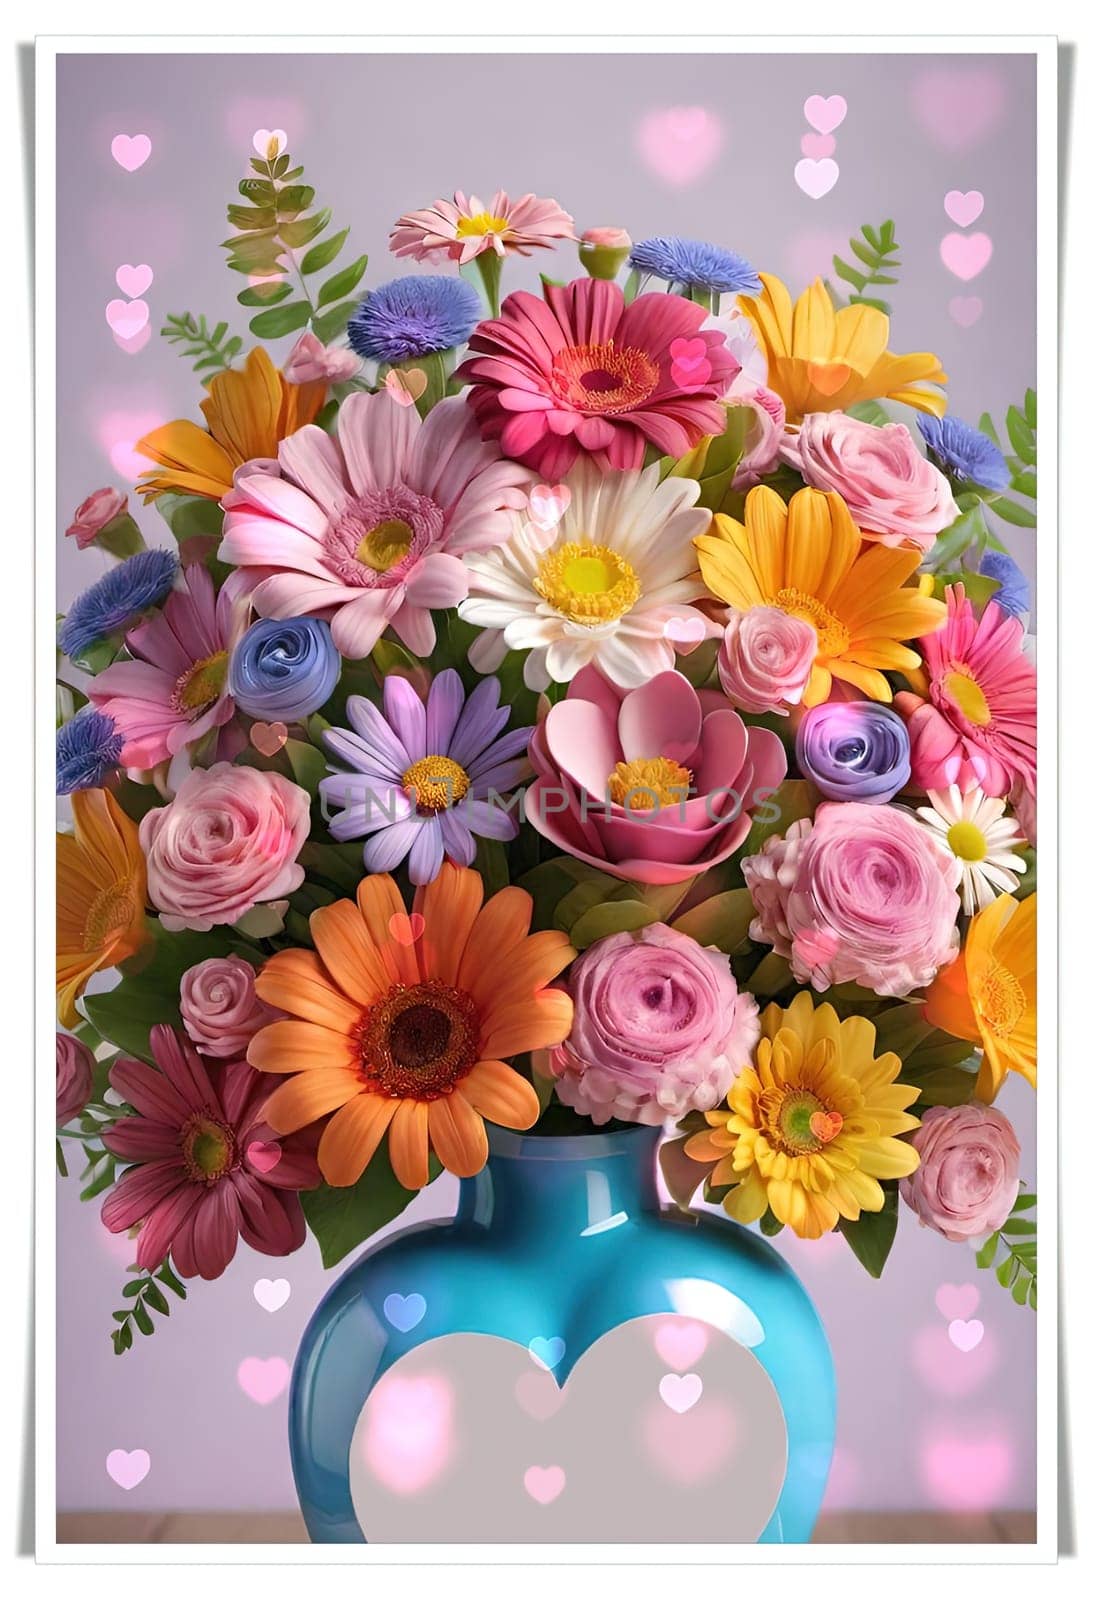 Bouquet of colorful flowers in a vase with a heart. by yilmazsavaskandag